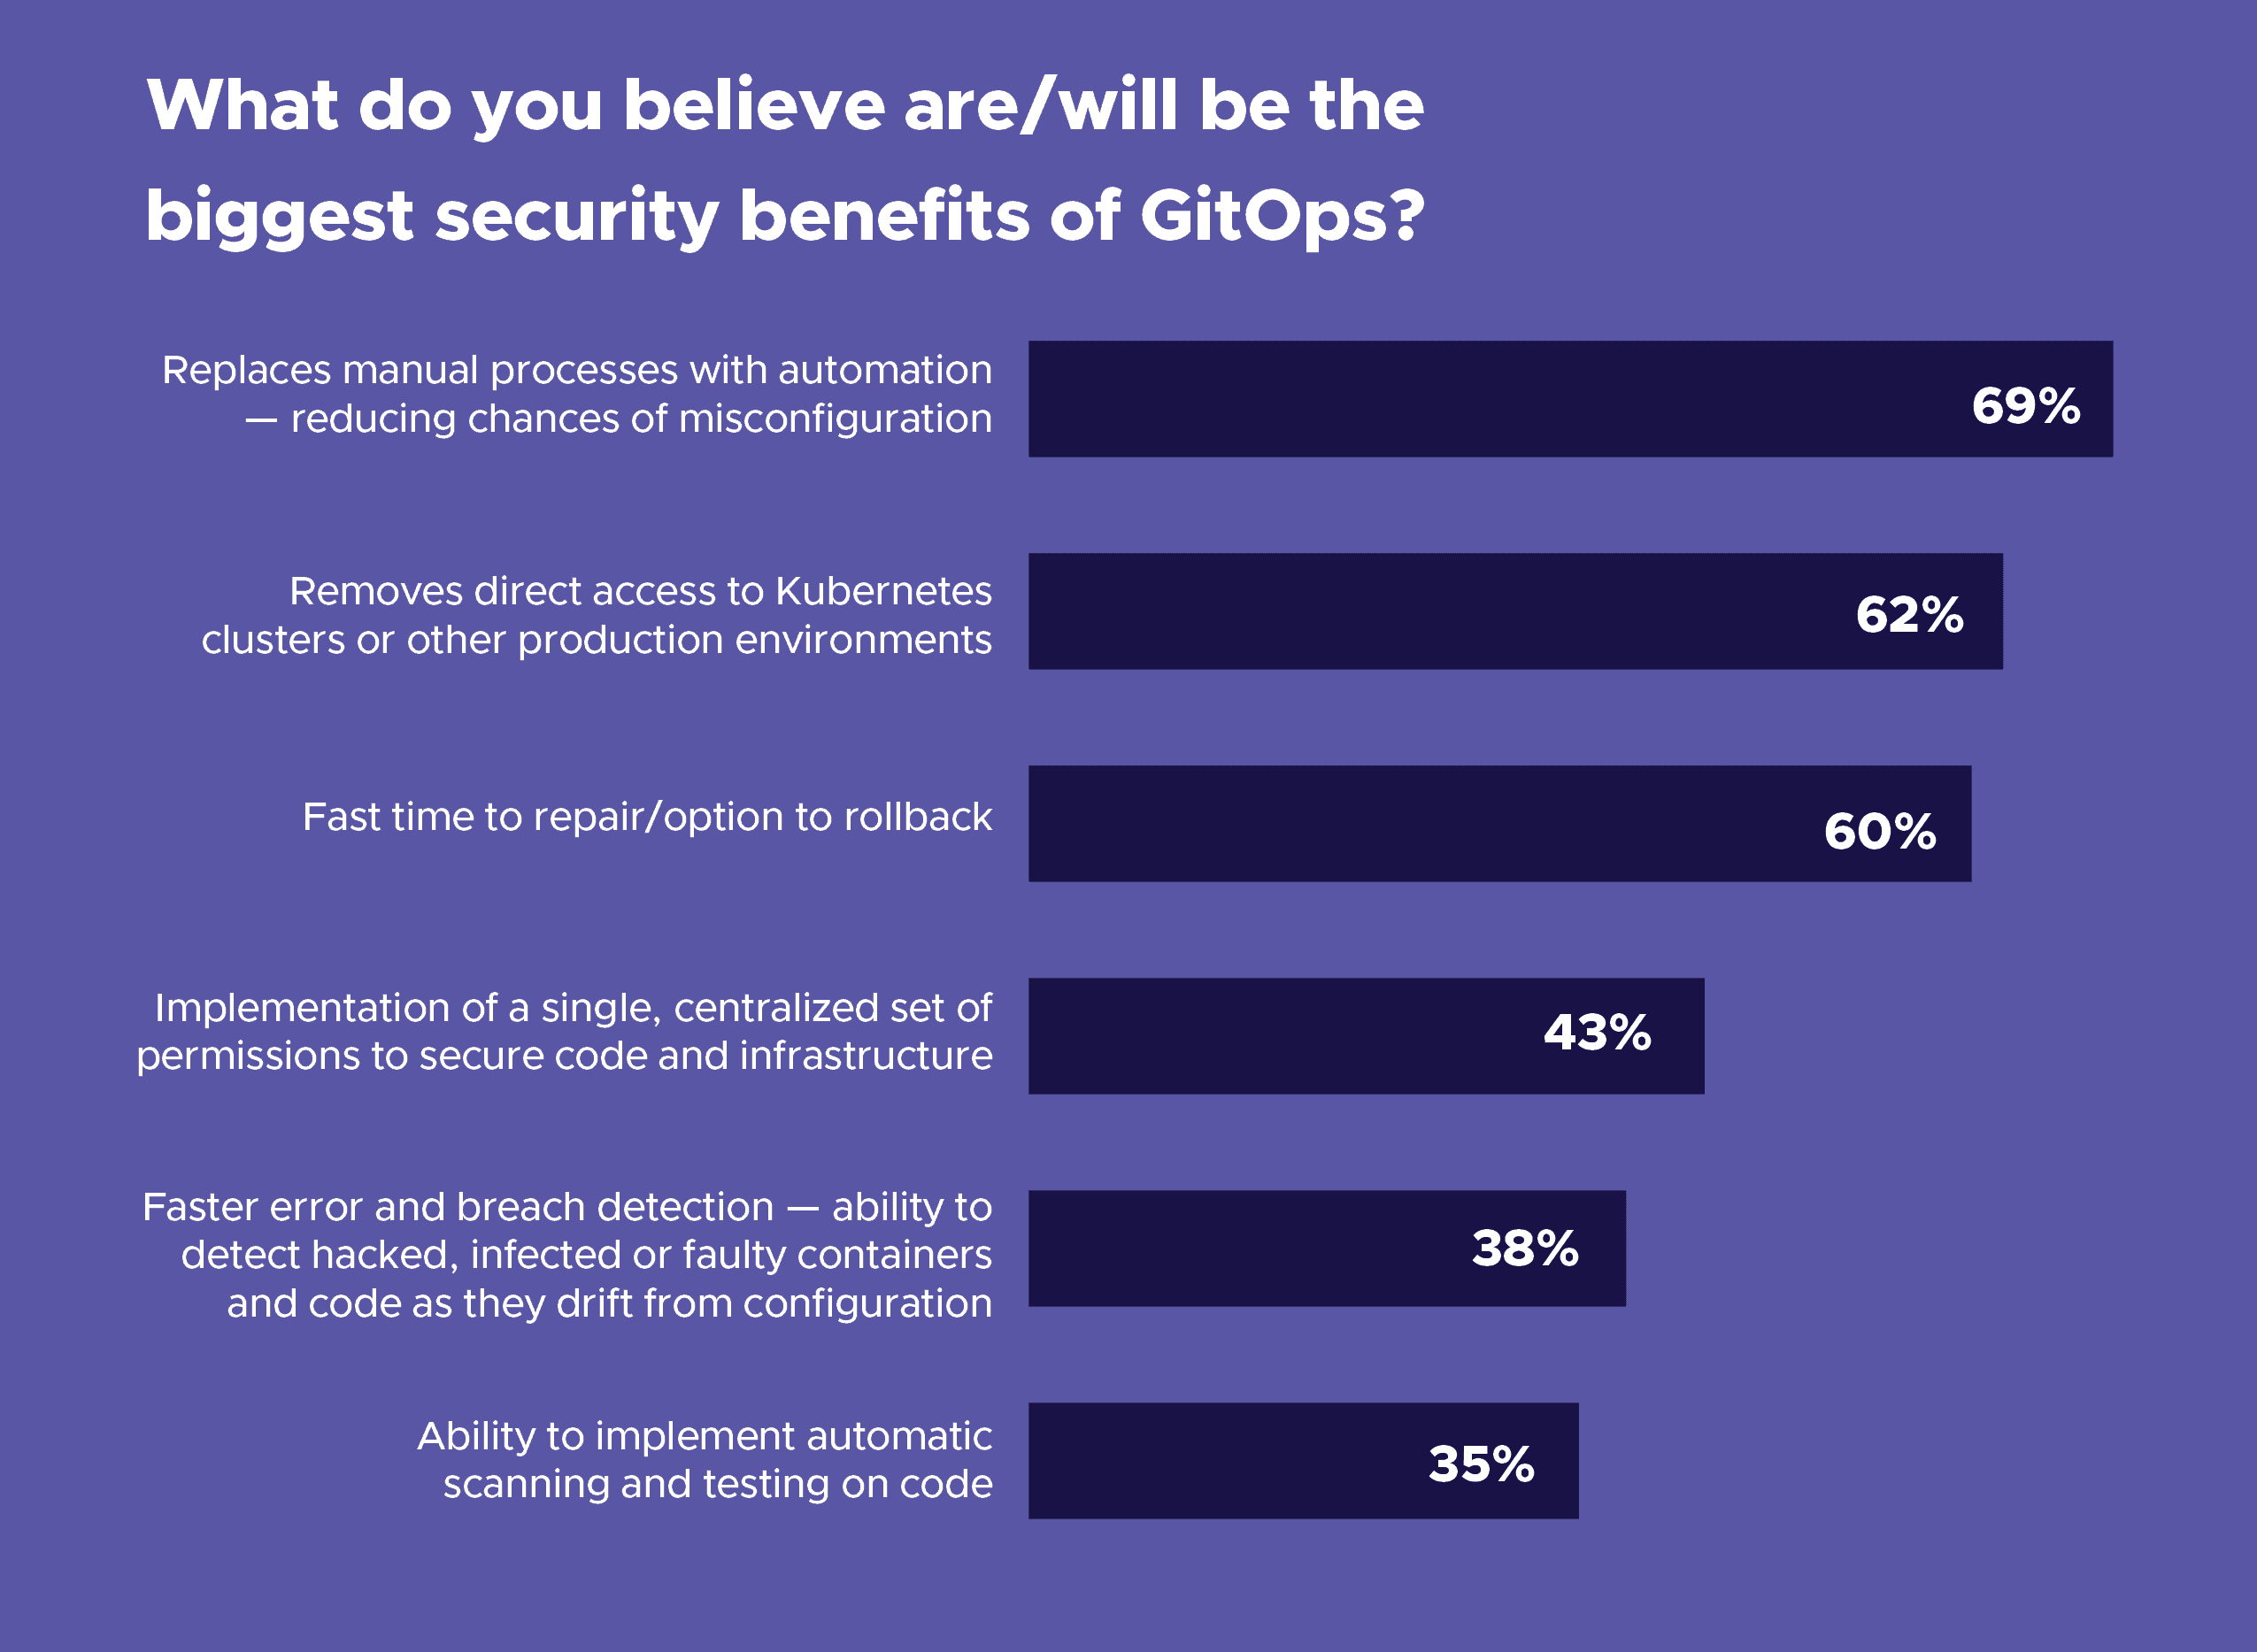 Bar chart showing respondent's respond towards question "What do you believe are/will be the biggest security benefits of GitOps?" 69% respondents respond "replaces manual processes with automation - reducing chances of misconfiguration" while 35% chose "ability to implement automatic scanning and testing on code"